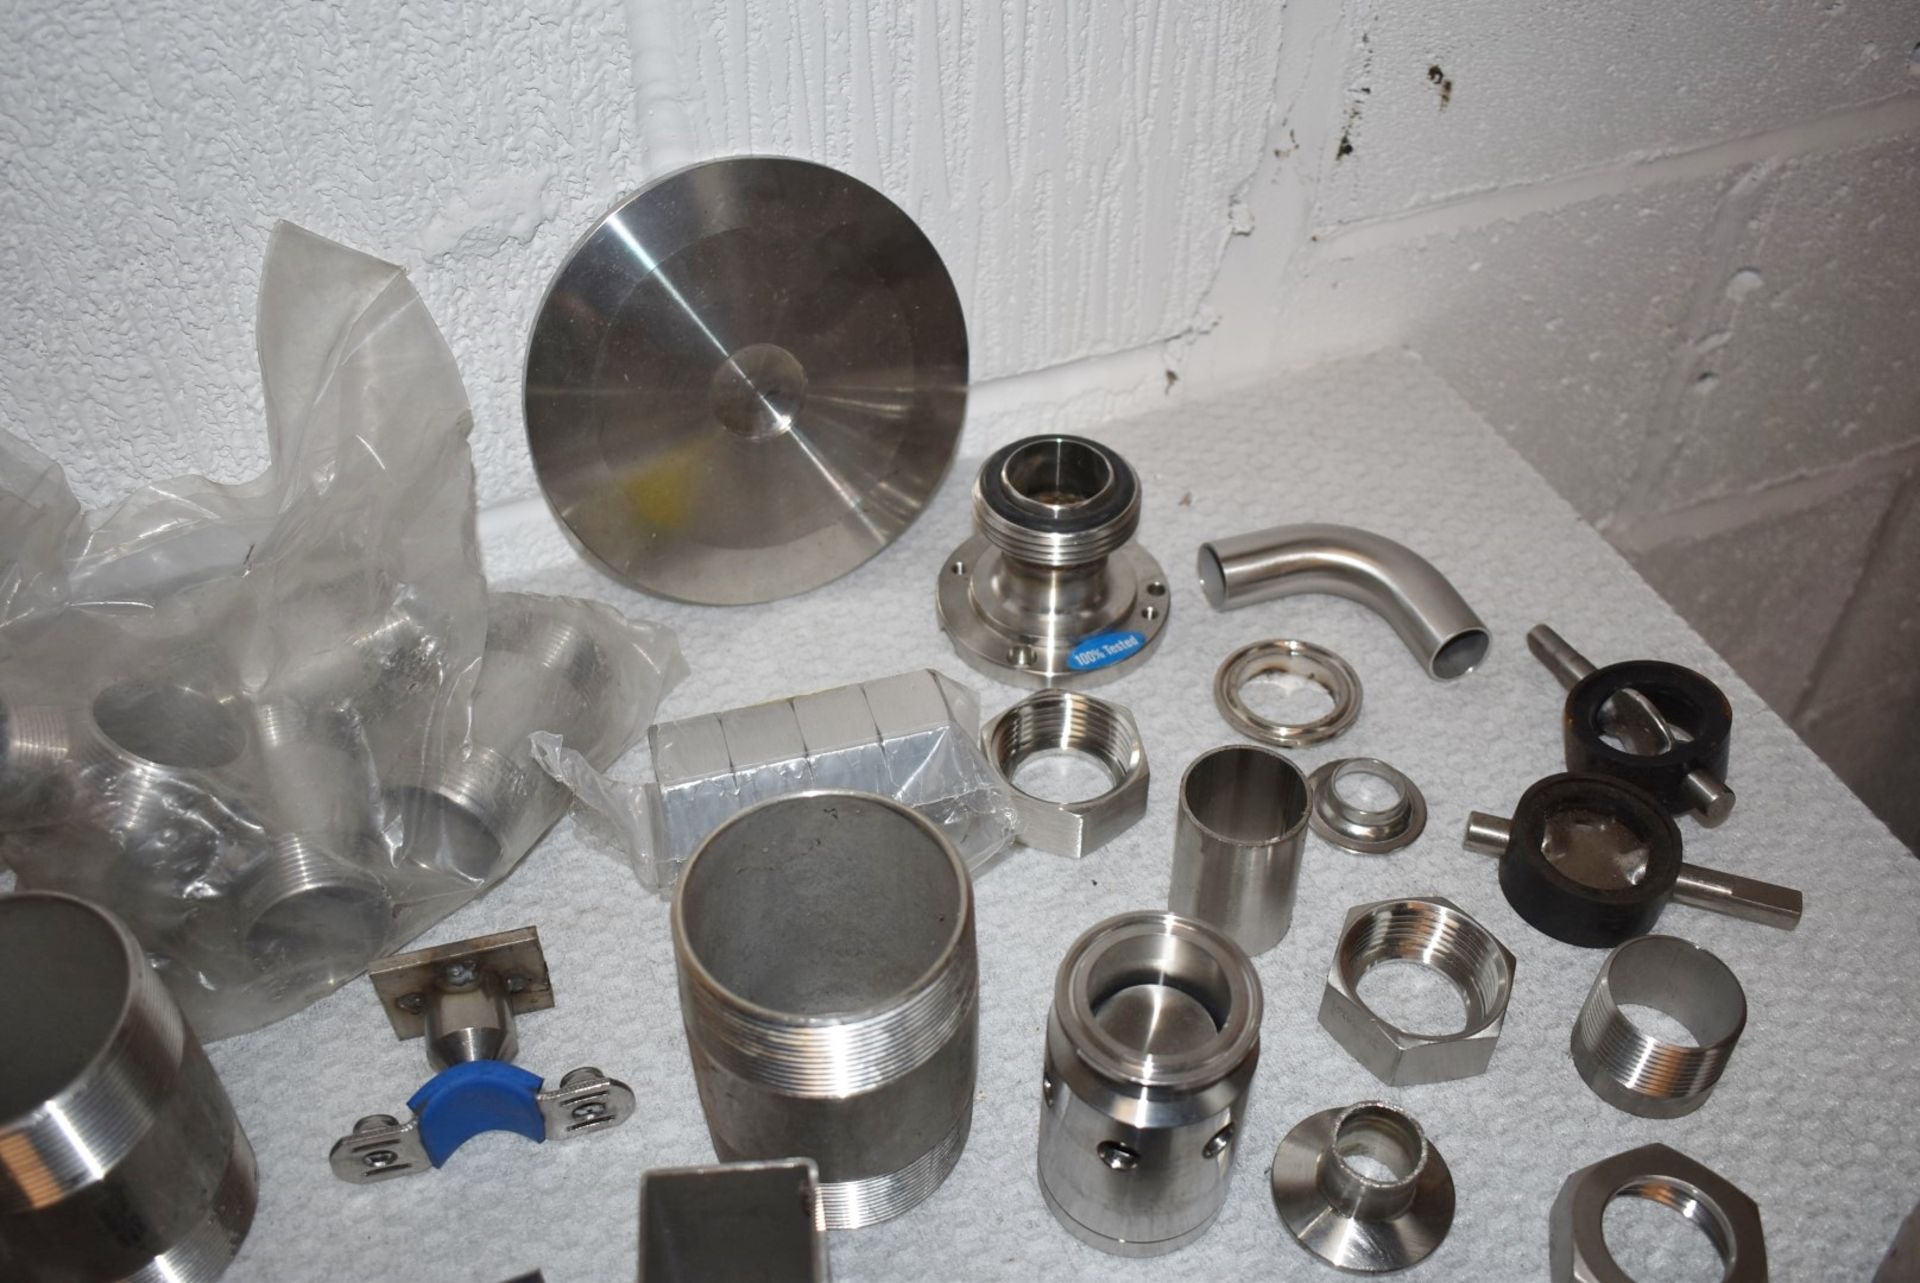 Assorted Job Lot of Stainless Steel Fittings For Brewery Equipment - Includes Approx 60 Pieces - - Image 7 of 17